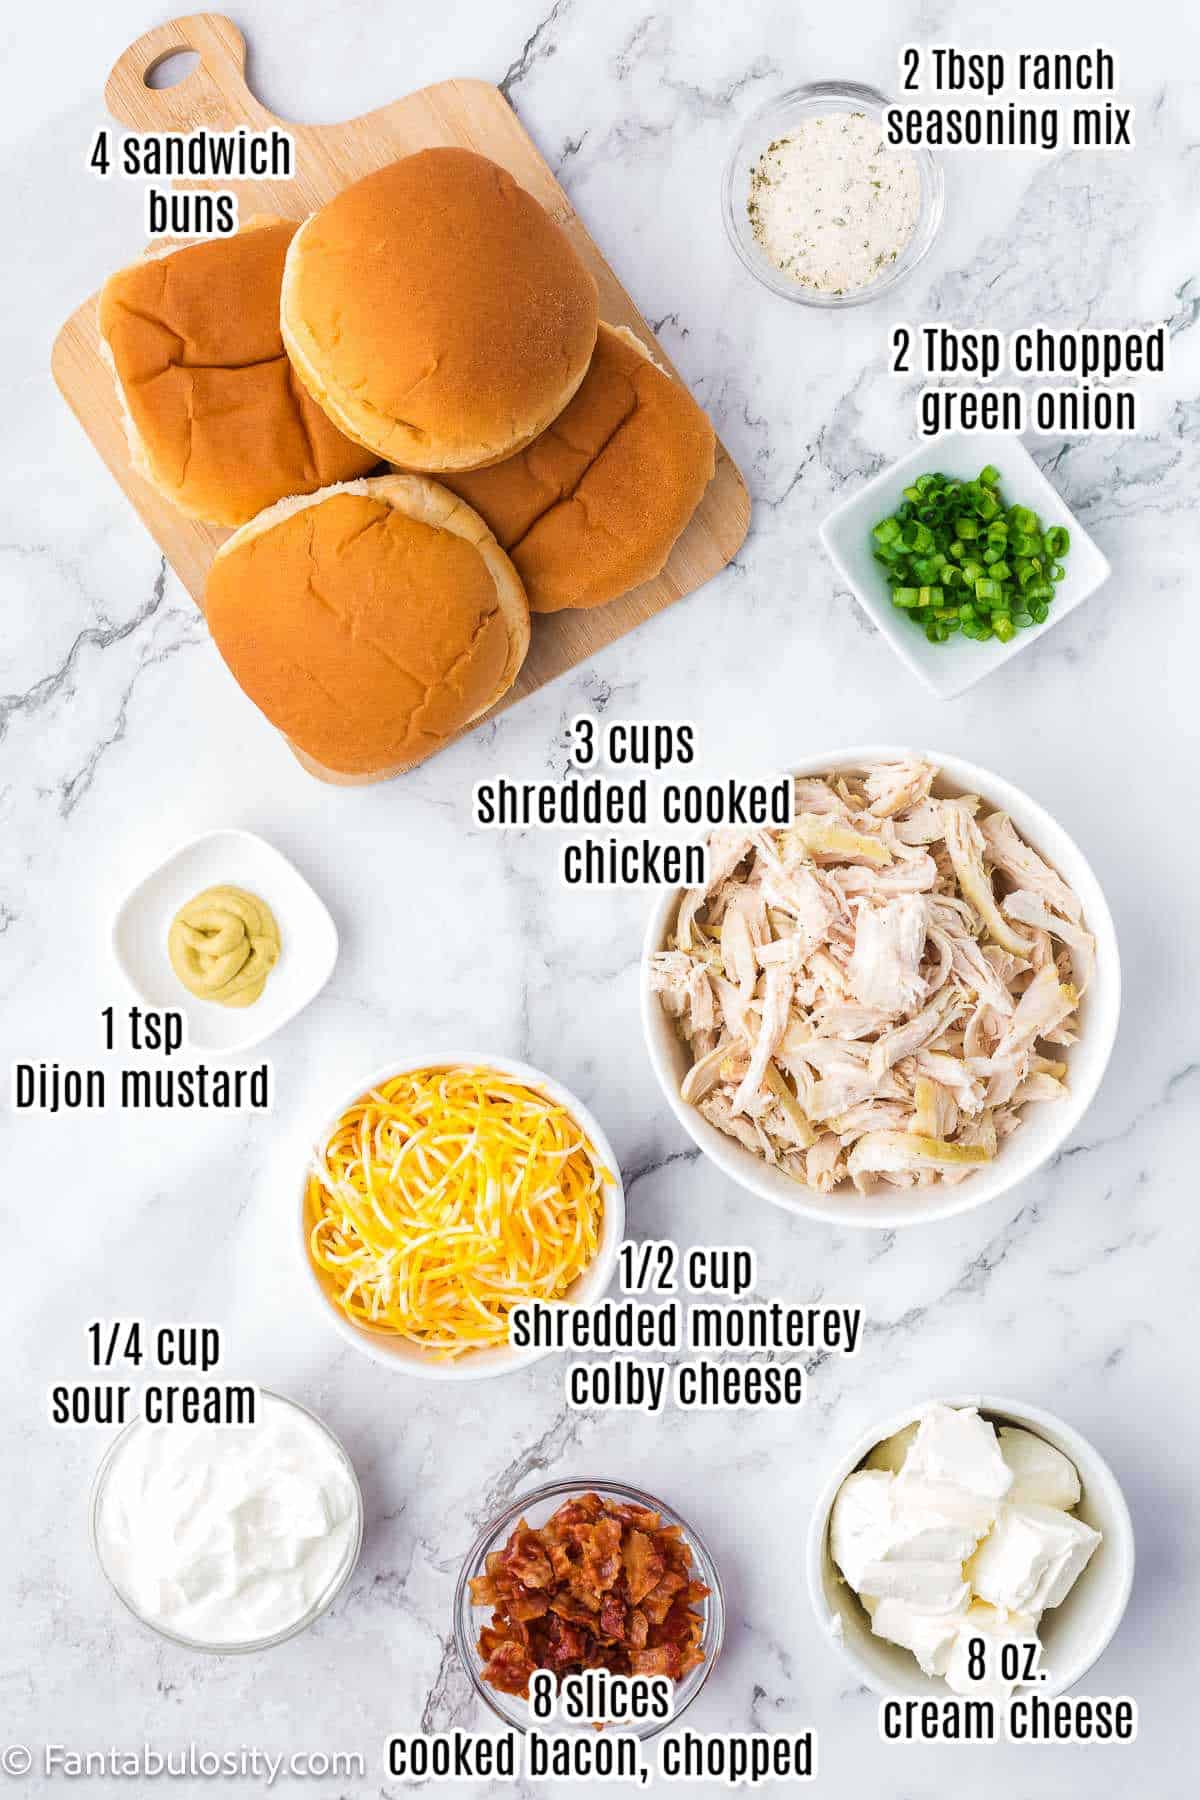 Labeled ingredients to make a chicken bacon ranch sandwich.